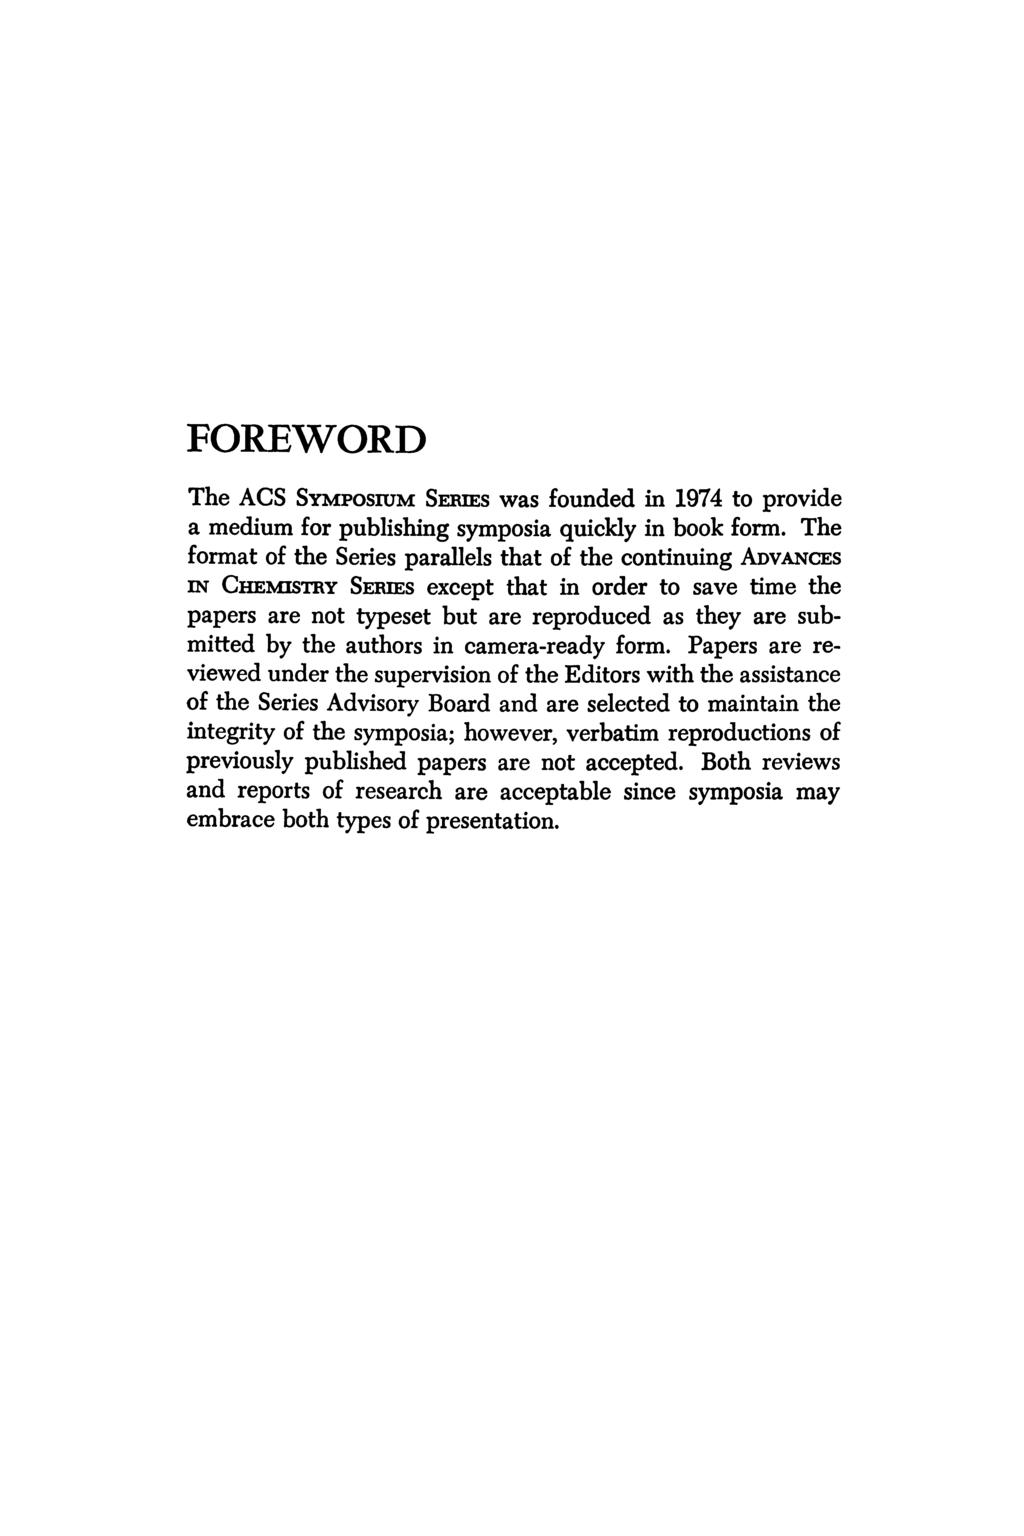 FOREWORD The ACS SYMPOSIUM SERIES was founded in 1974 to provide a medium for publishing symposia quickly in book form.